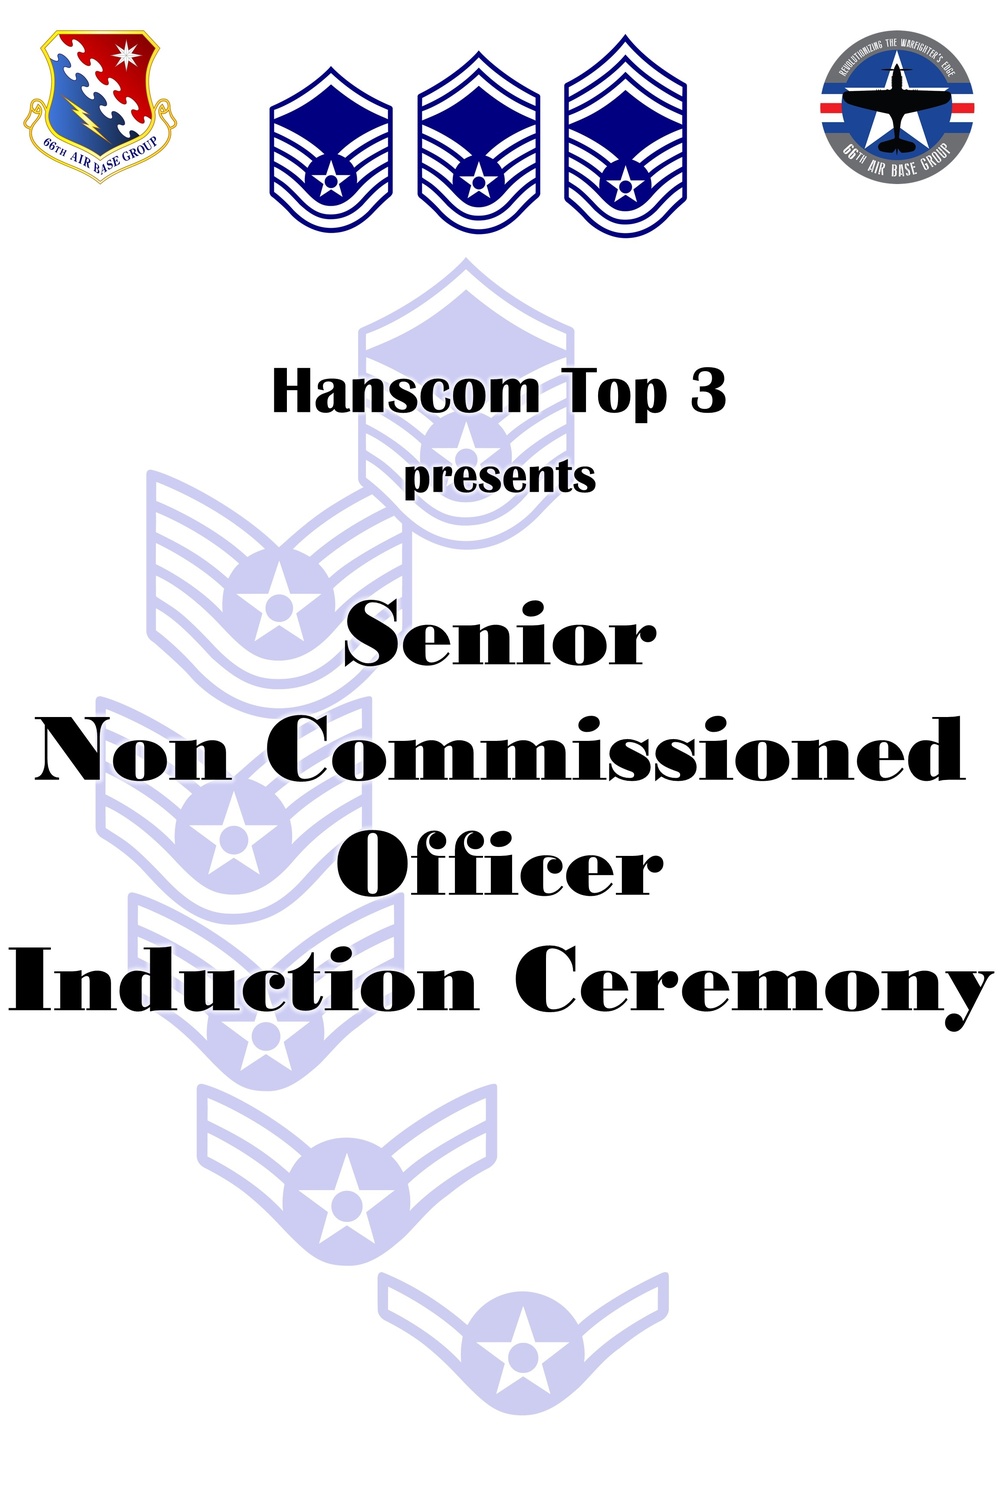 Hanscom AFB holding a ceremony to induct newest senior NCOs